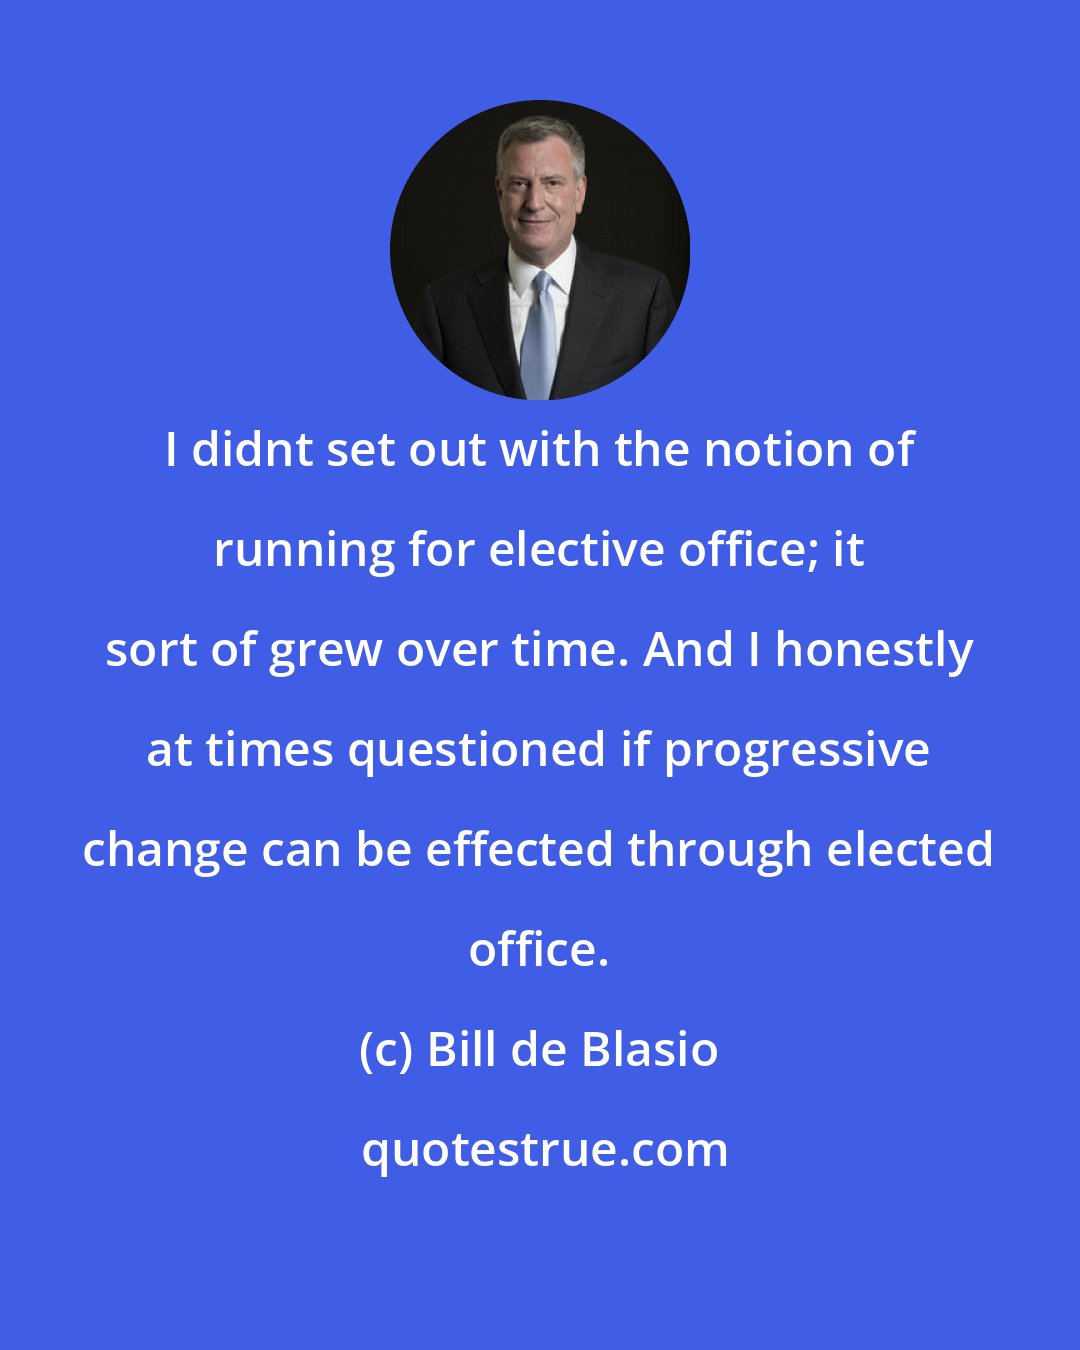 Bill de Blasio: I didnt set out with the notion of running for elective office; it sort of grew over time. And I honestly at times questioned if progressive change can be effected through elected office.